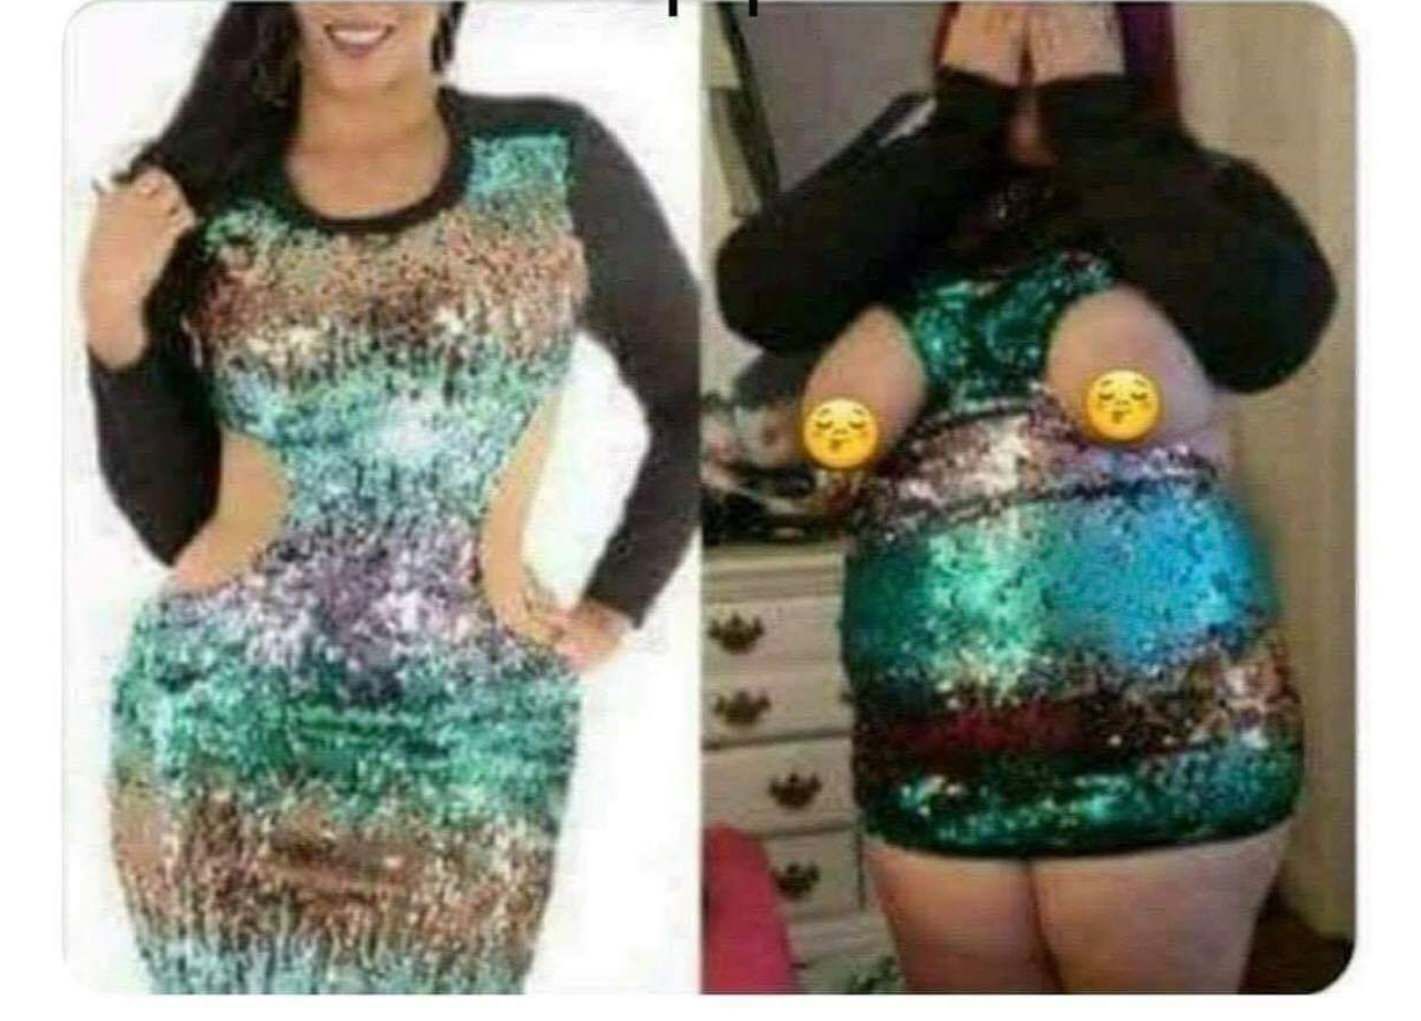 When you order from Aliexpress..